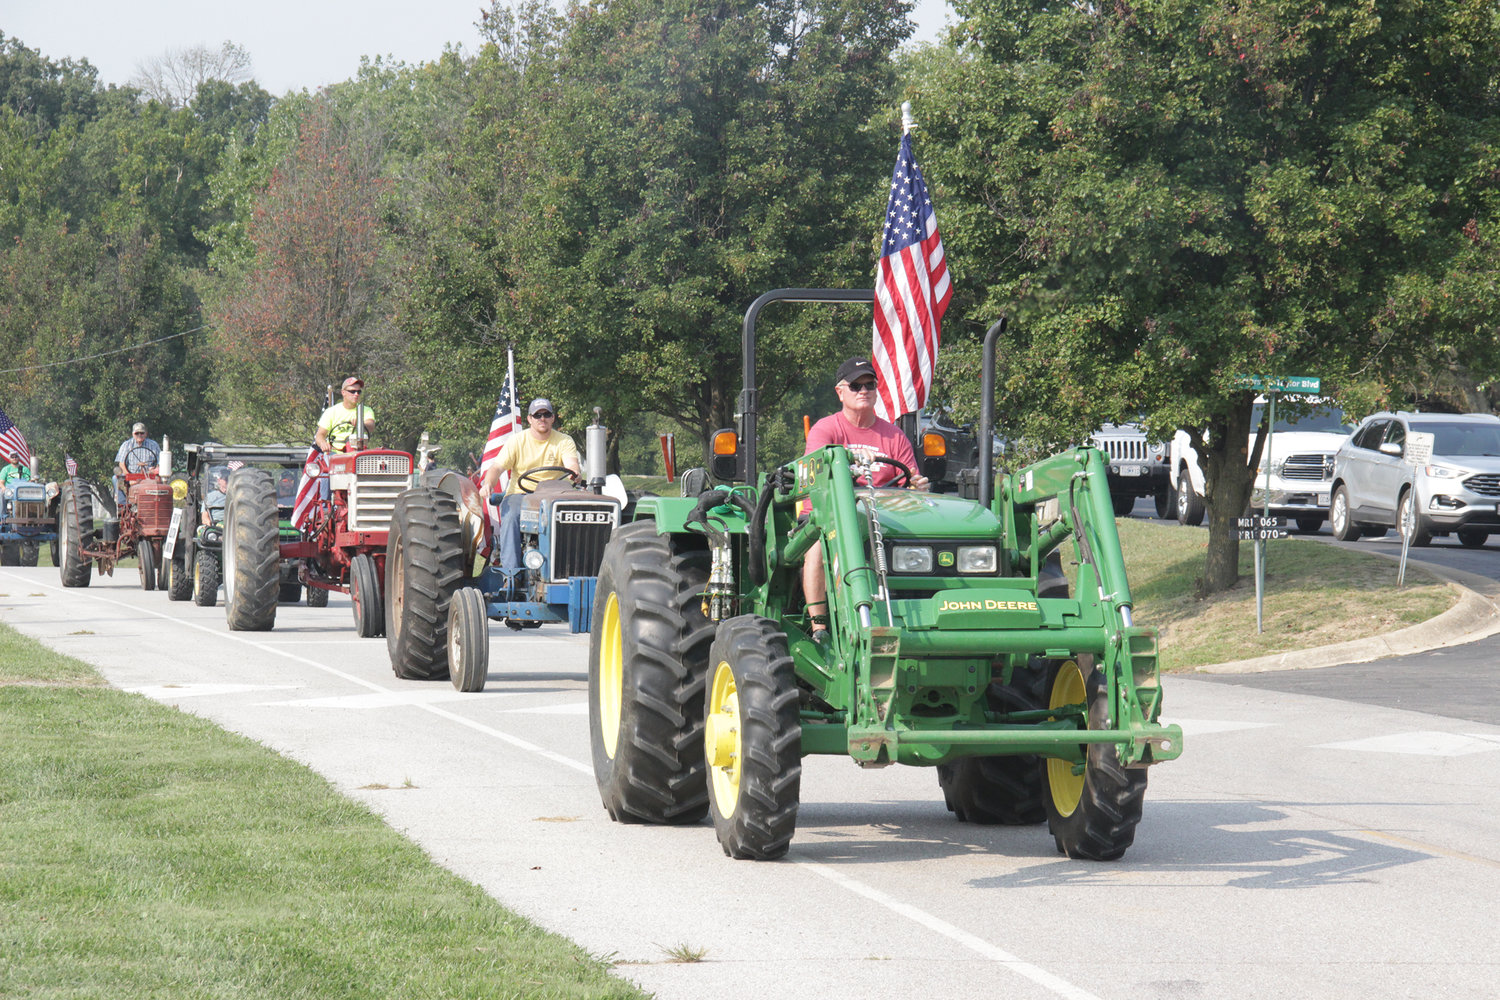 TRACTOR CRUISE — Tractors begin their cruise through southern Warren County on a mission to collect food and money for area food pantries during the Journey For Charity Tractor Cruise on Sept. 12.